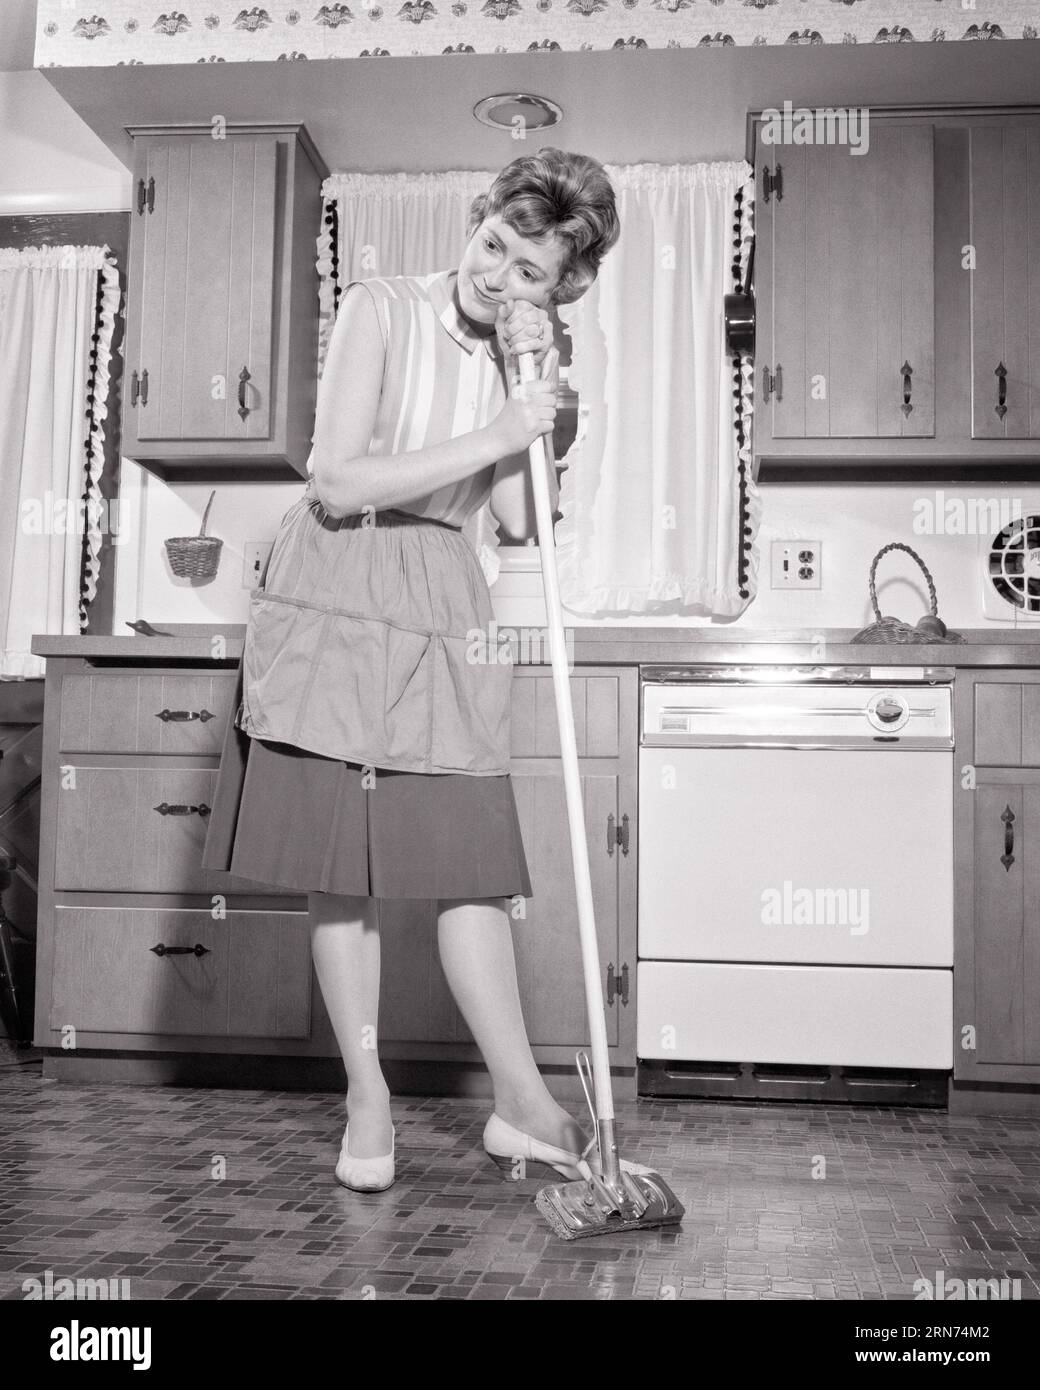 https://c8.alamy.com/comp/2RN74M2/1960s-woman-housewife-leaning-on-handle-of-sponge-mop-in-the-kitchen-tired-but-proud-of-newly-waxed-floor-h7120-har001-hars-chores-females-proud-moody-home-life-full-length-ladies-persons-expressions-troubled-bw-concerned-sadness-homemaker-dreams-homemakers-chore-choice-low-angle-sponge-housewives-mood-mopping-occupations-conceptual-glum-handle-waxed-dejected-mid-adult-mid-adult-woman-miserable-newly-task-black-and-white-caucasian-ethnicity-har001-old-fashioned-2RN74M2.jpg